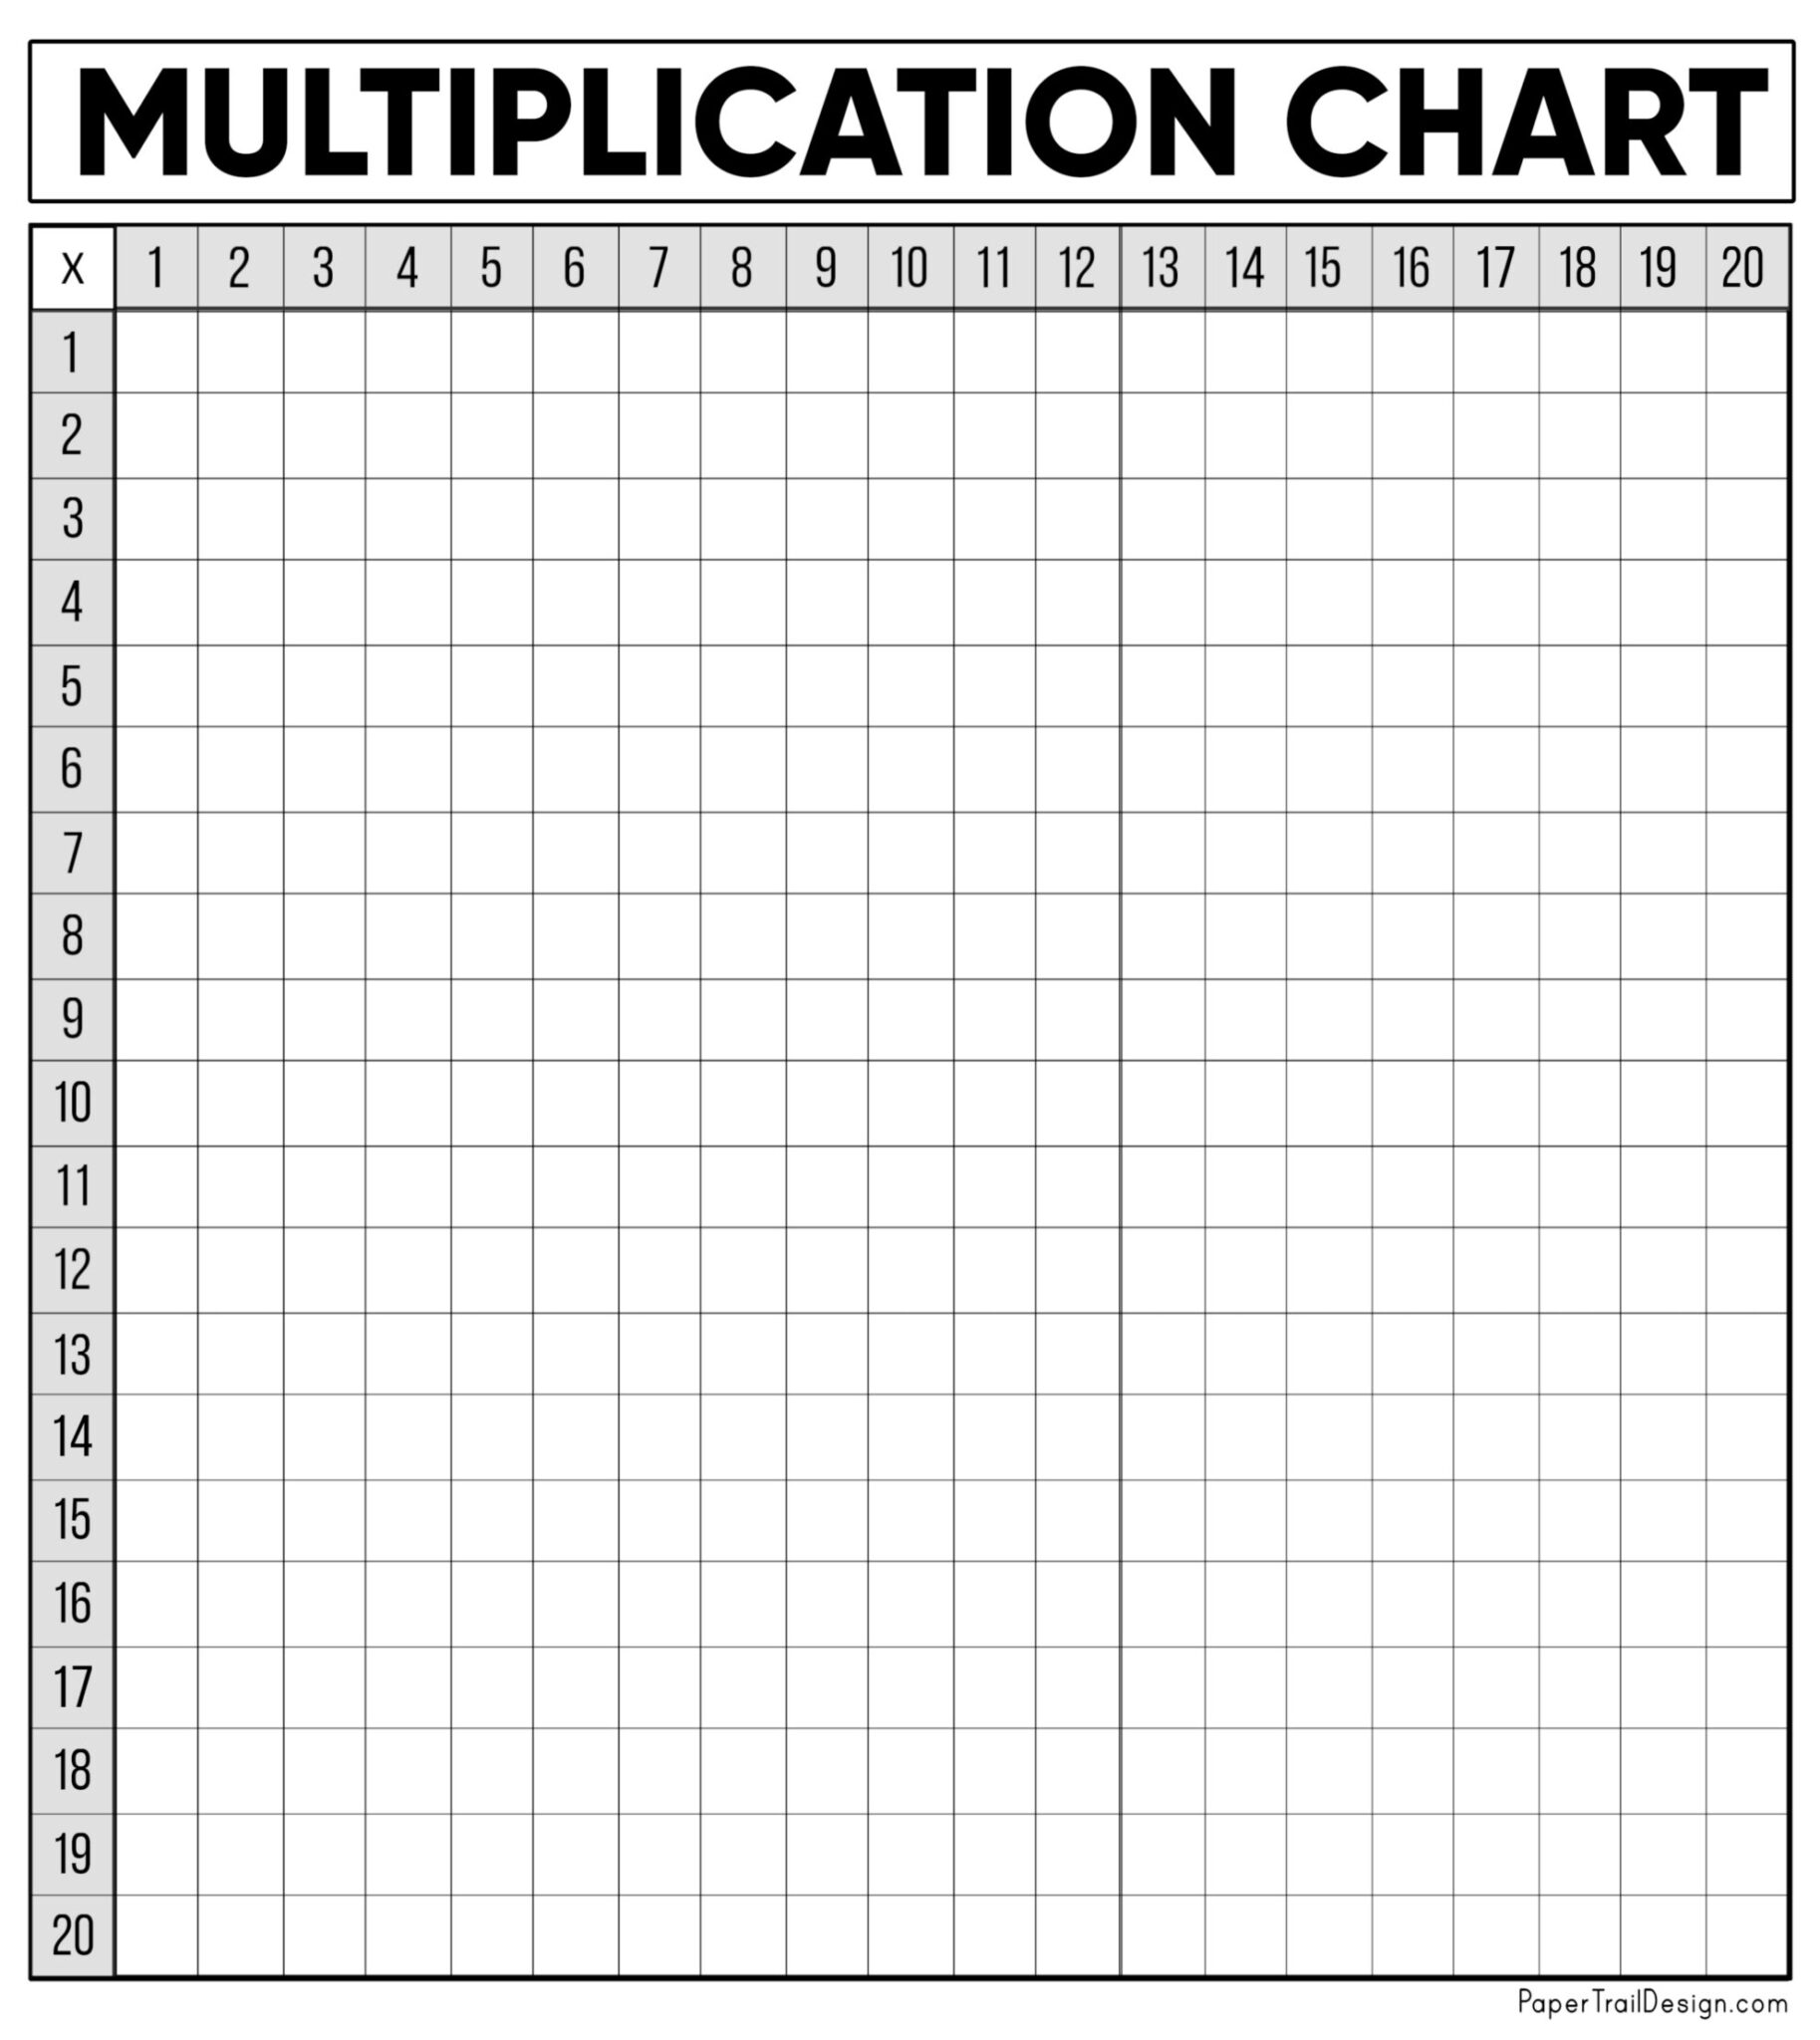 free-multiplication-chart-printable-paper-trail-design